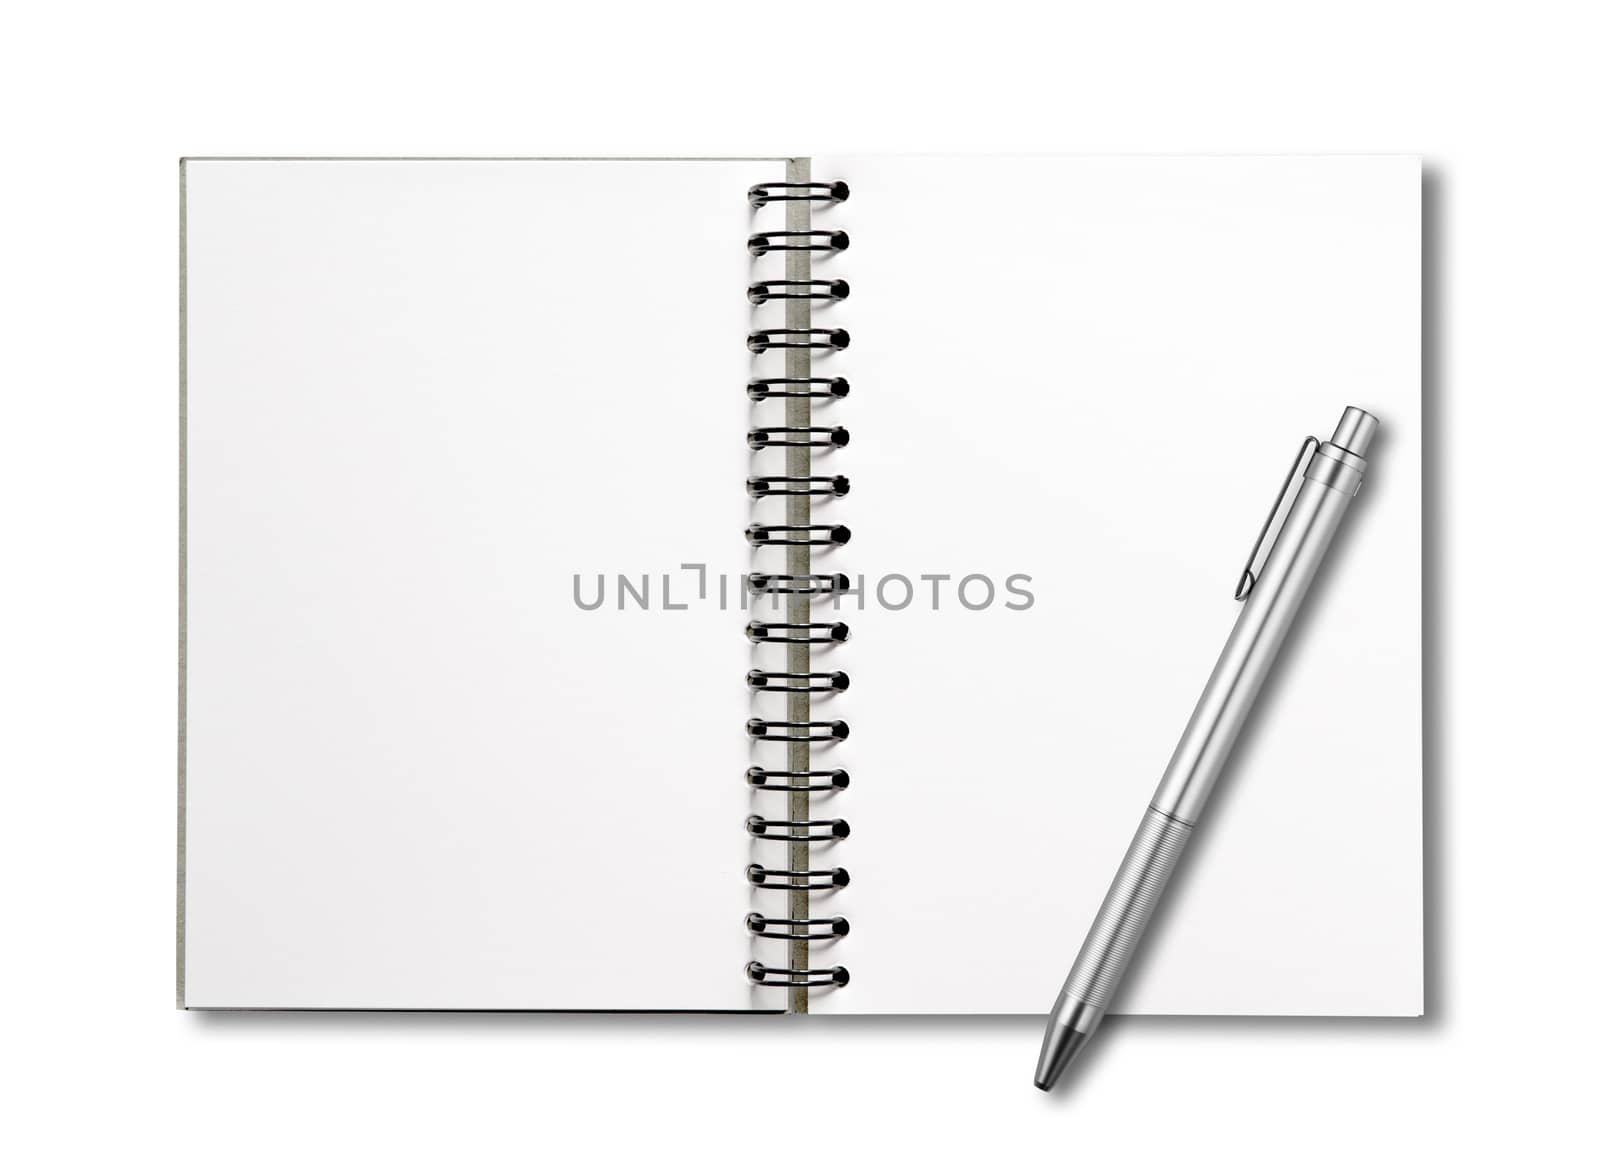 Blank open spiral notebook and pen mockup isolated on white